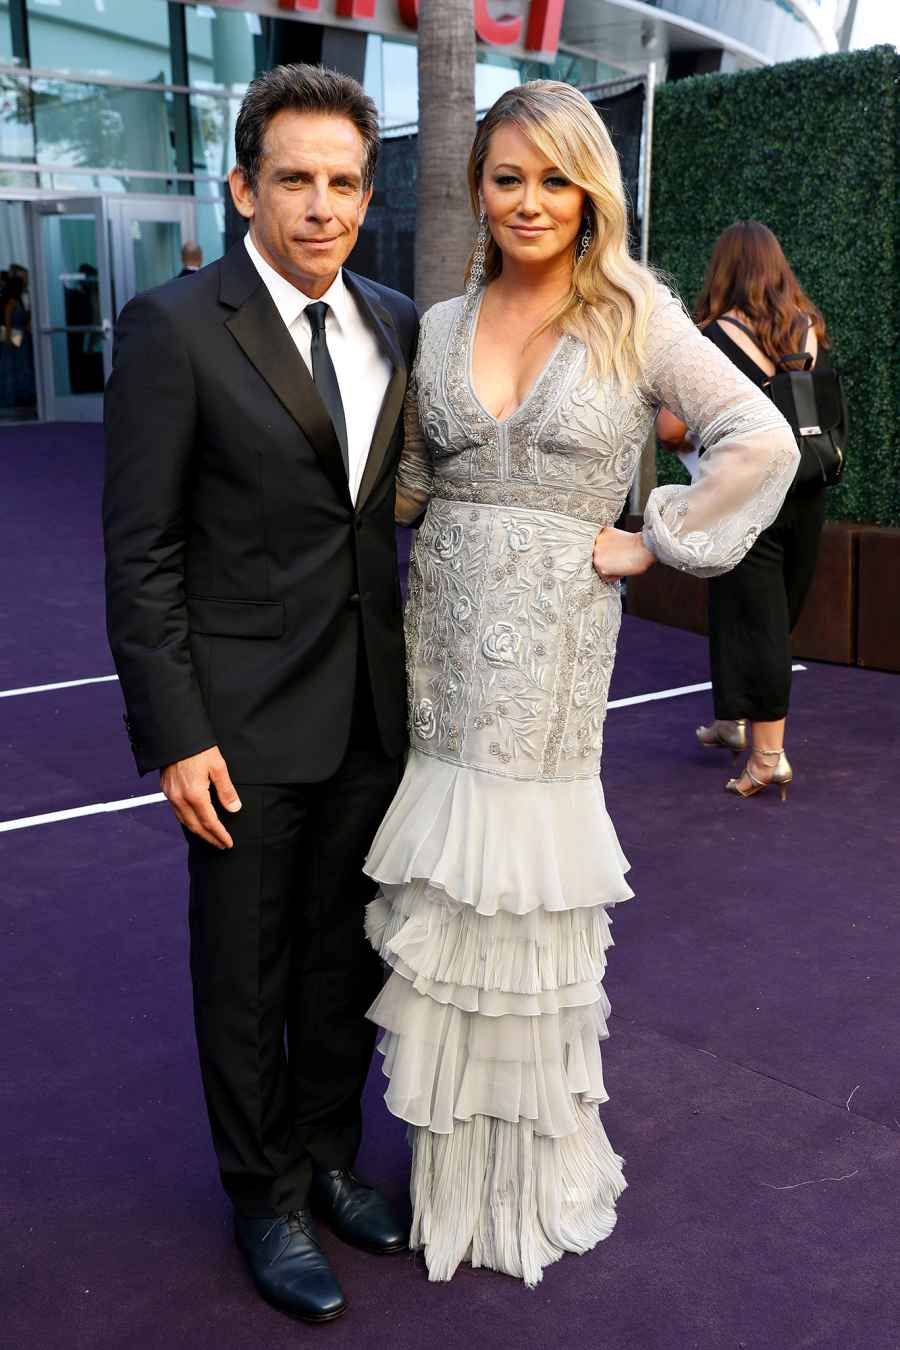 Ben Stiller and Christine Taylor What You Didn't See on TV Gallery Emmys 2019